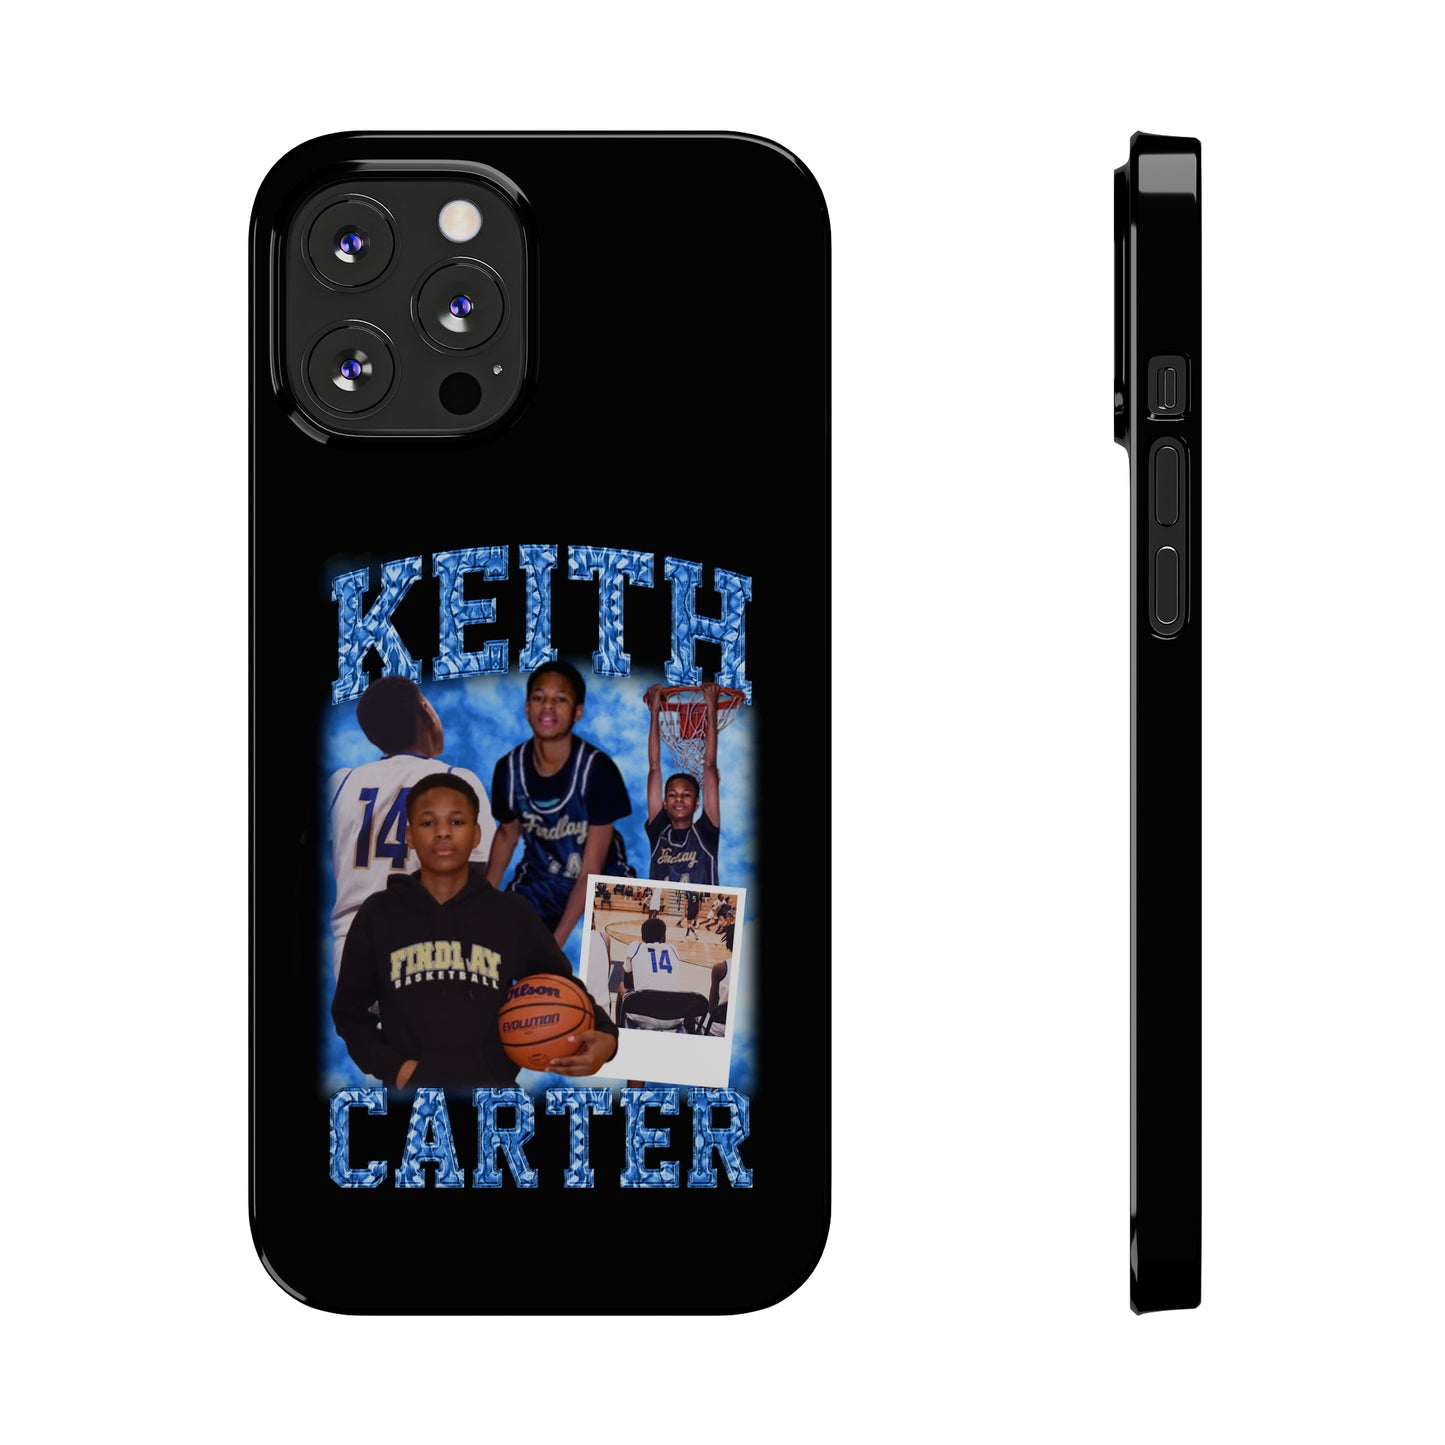 Keith Carter Slim Phone Cases